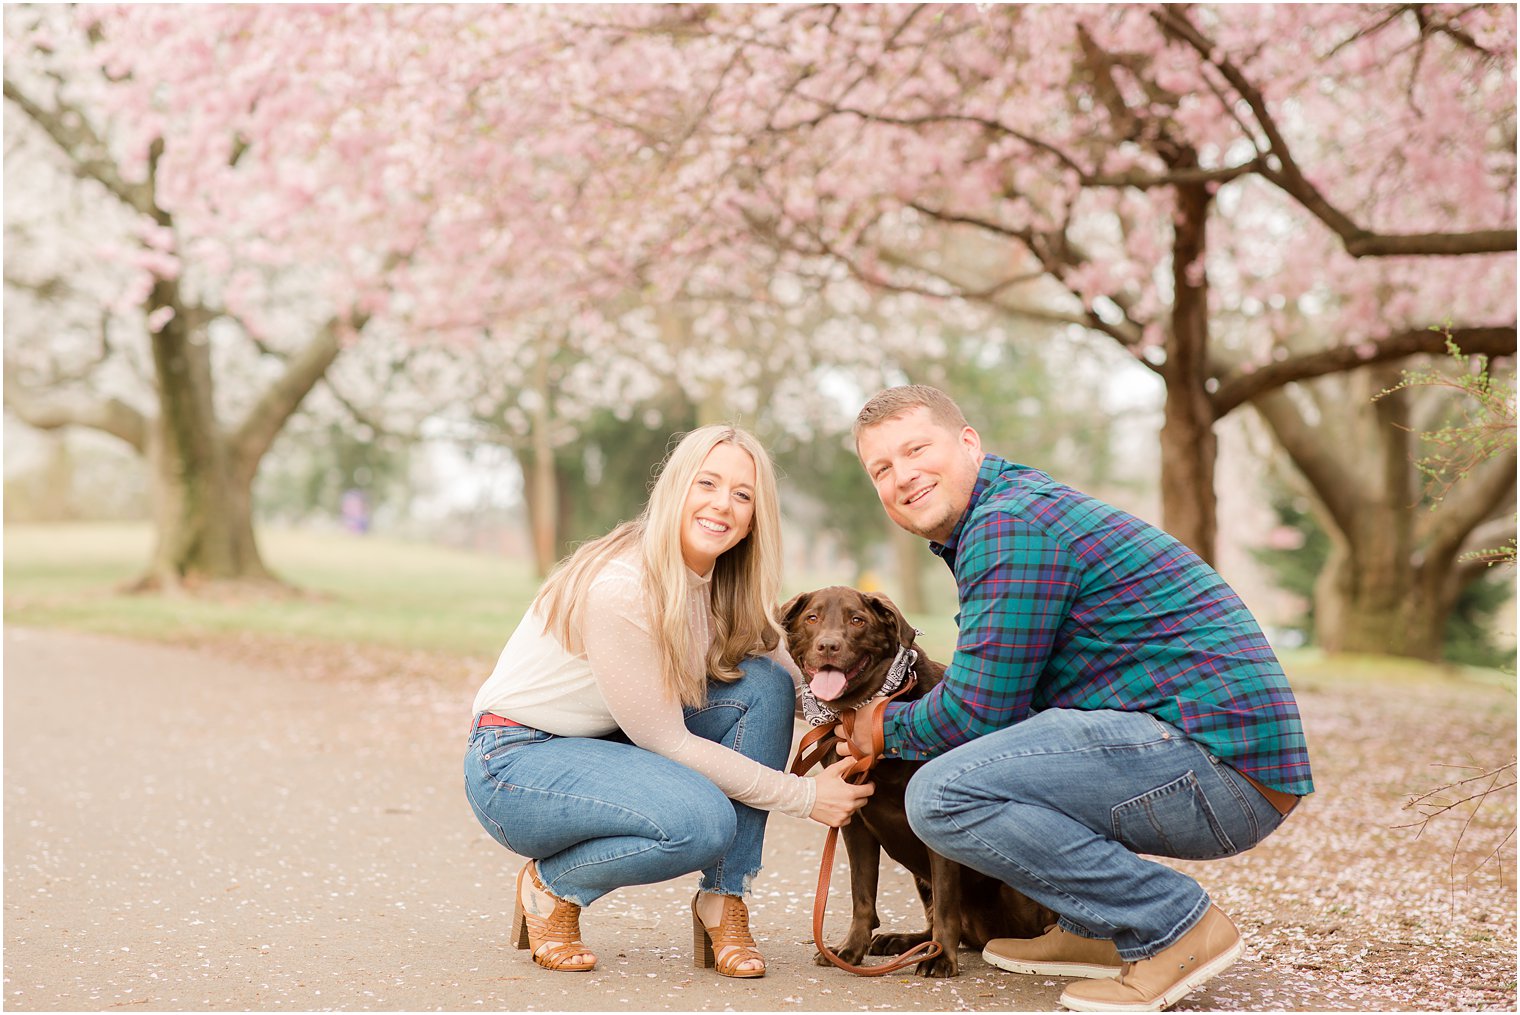 Spring Cherry Blossom Engagement session photos with dog at Branch Brook Park by Idalia Photography